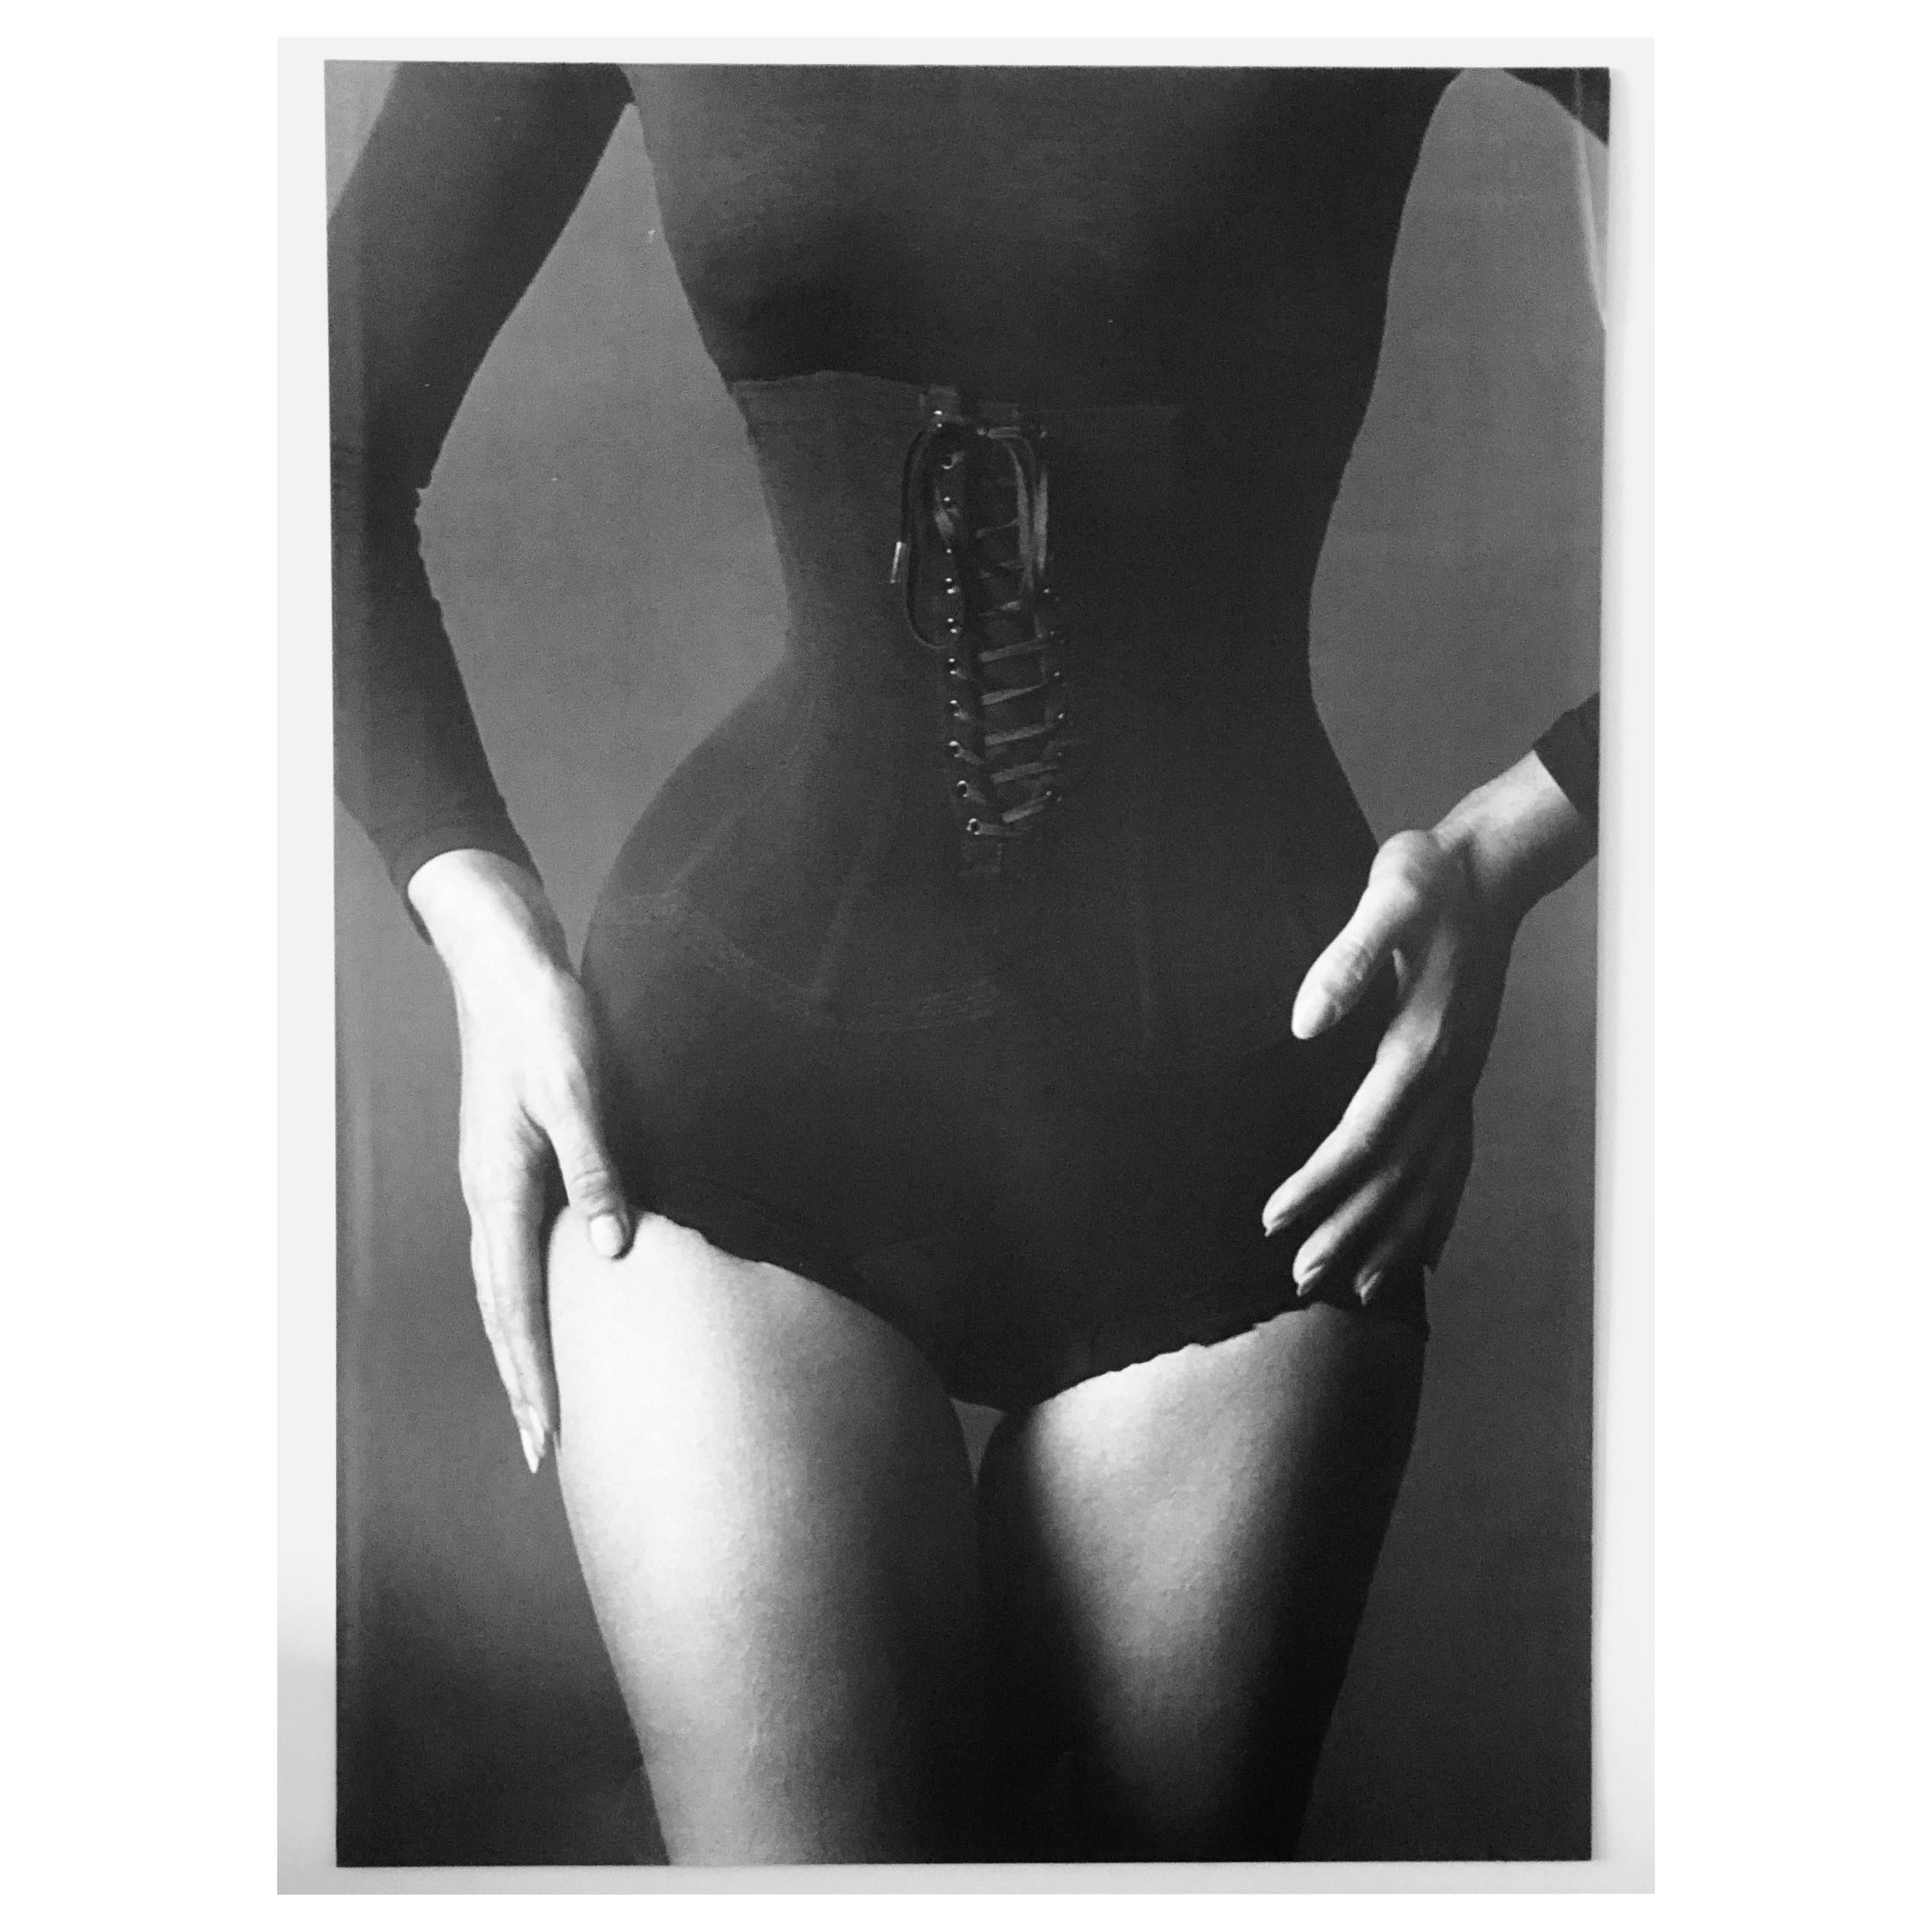 Black and White Glossy Photo Lithograph by Jeanloup Sieff, "Corset", NYC 1962